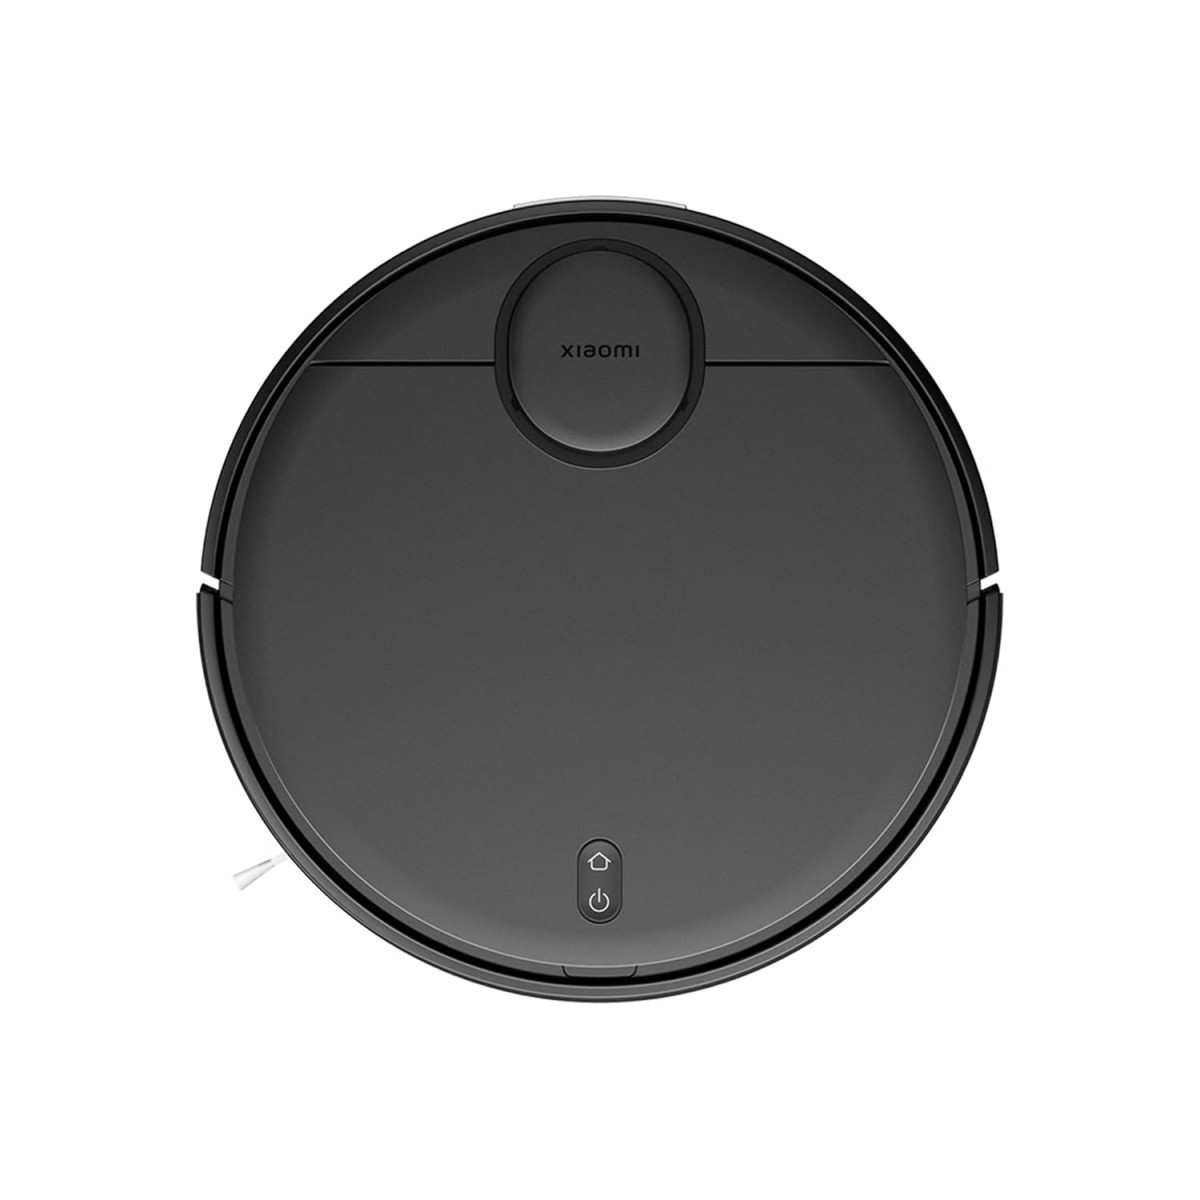 Xiaomi Robot Vacuum Cleaner S10 4000 Pa Turbo Suction Advanced Laser Navigation with 360 Degree Detection Smart Mapping Pro Cleaning Multiple Map Memory Daily Schedule Cleaning Vacuum and Mop